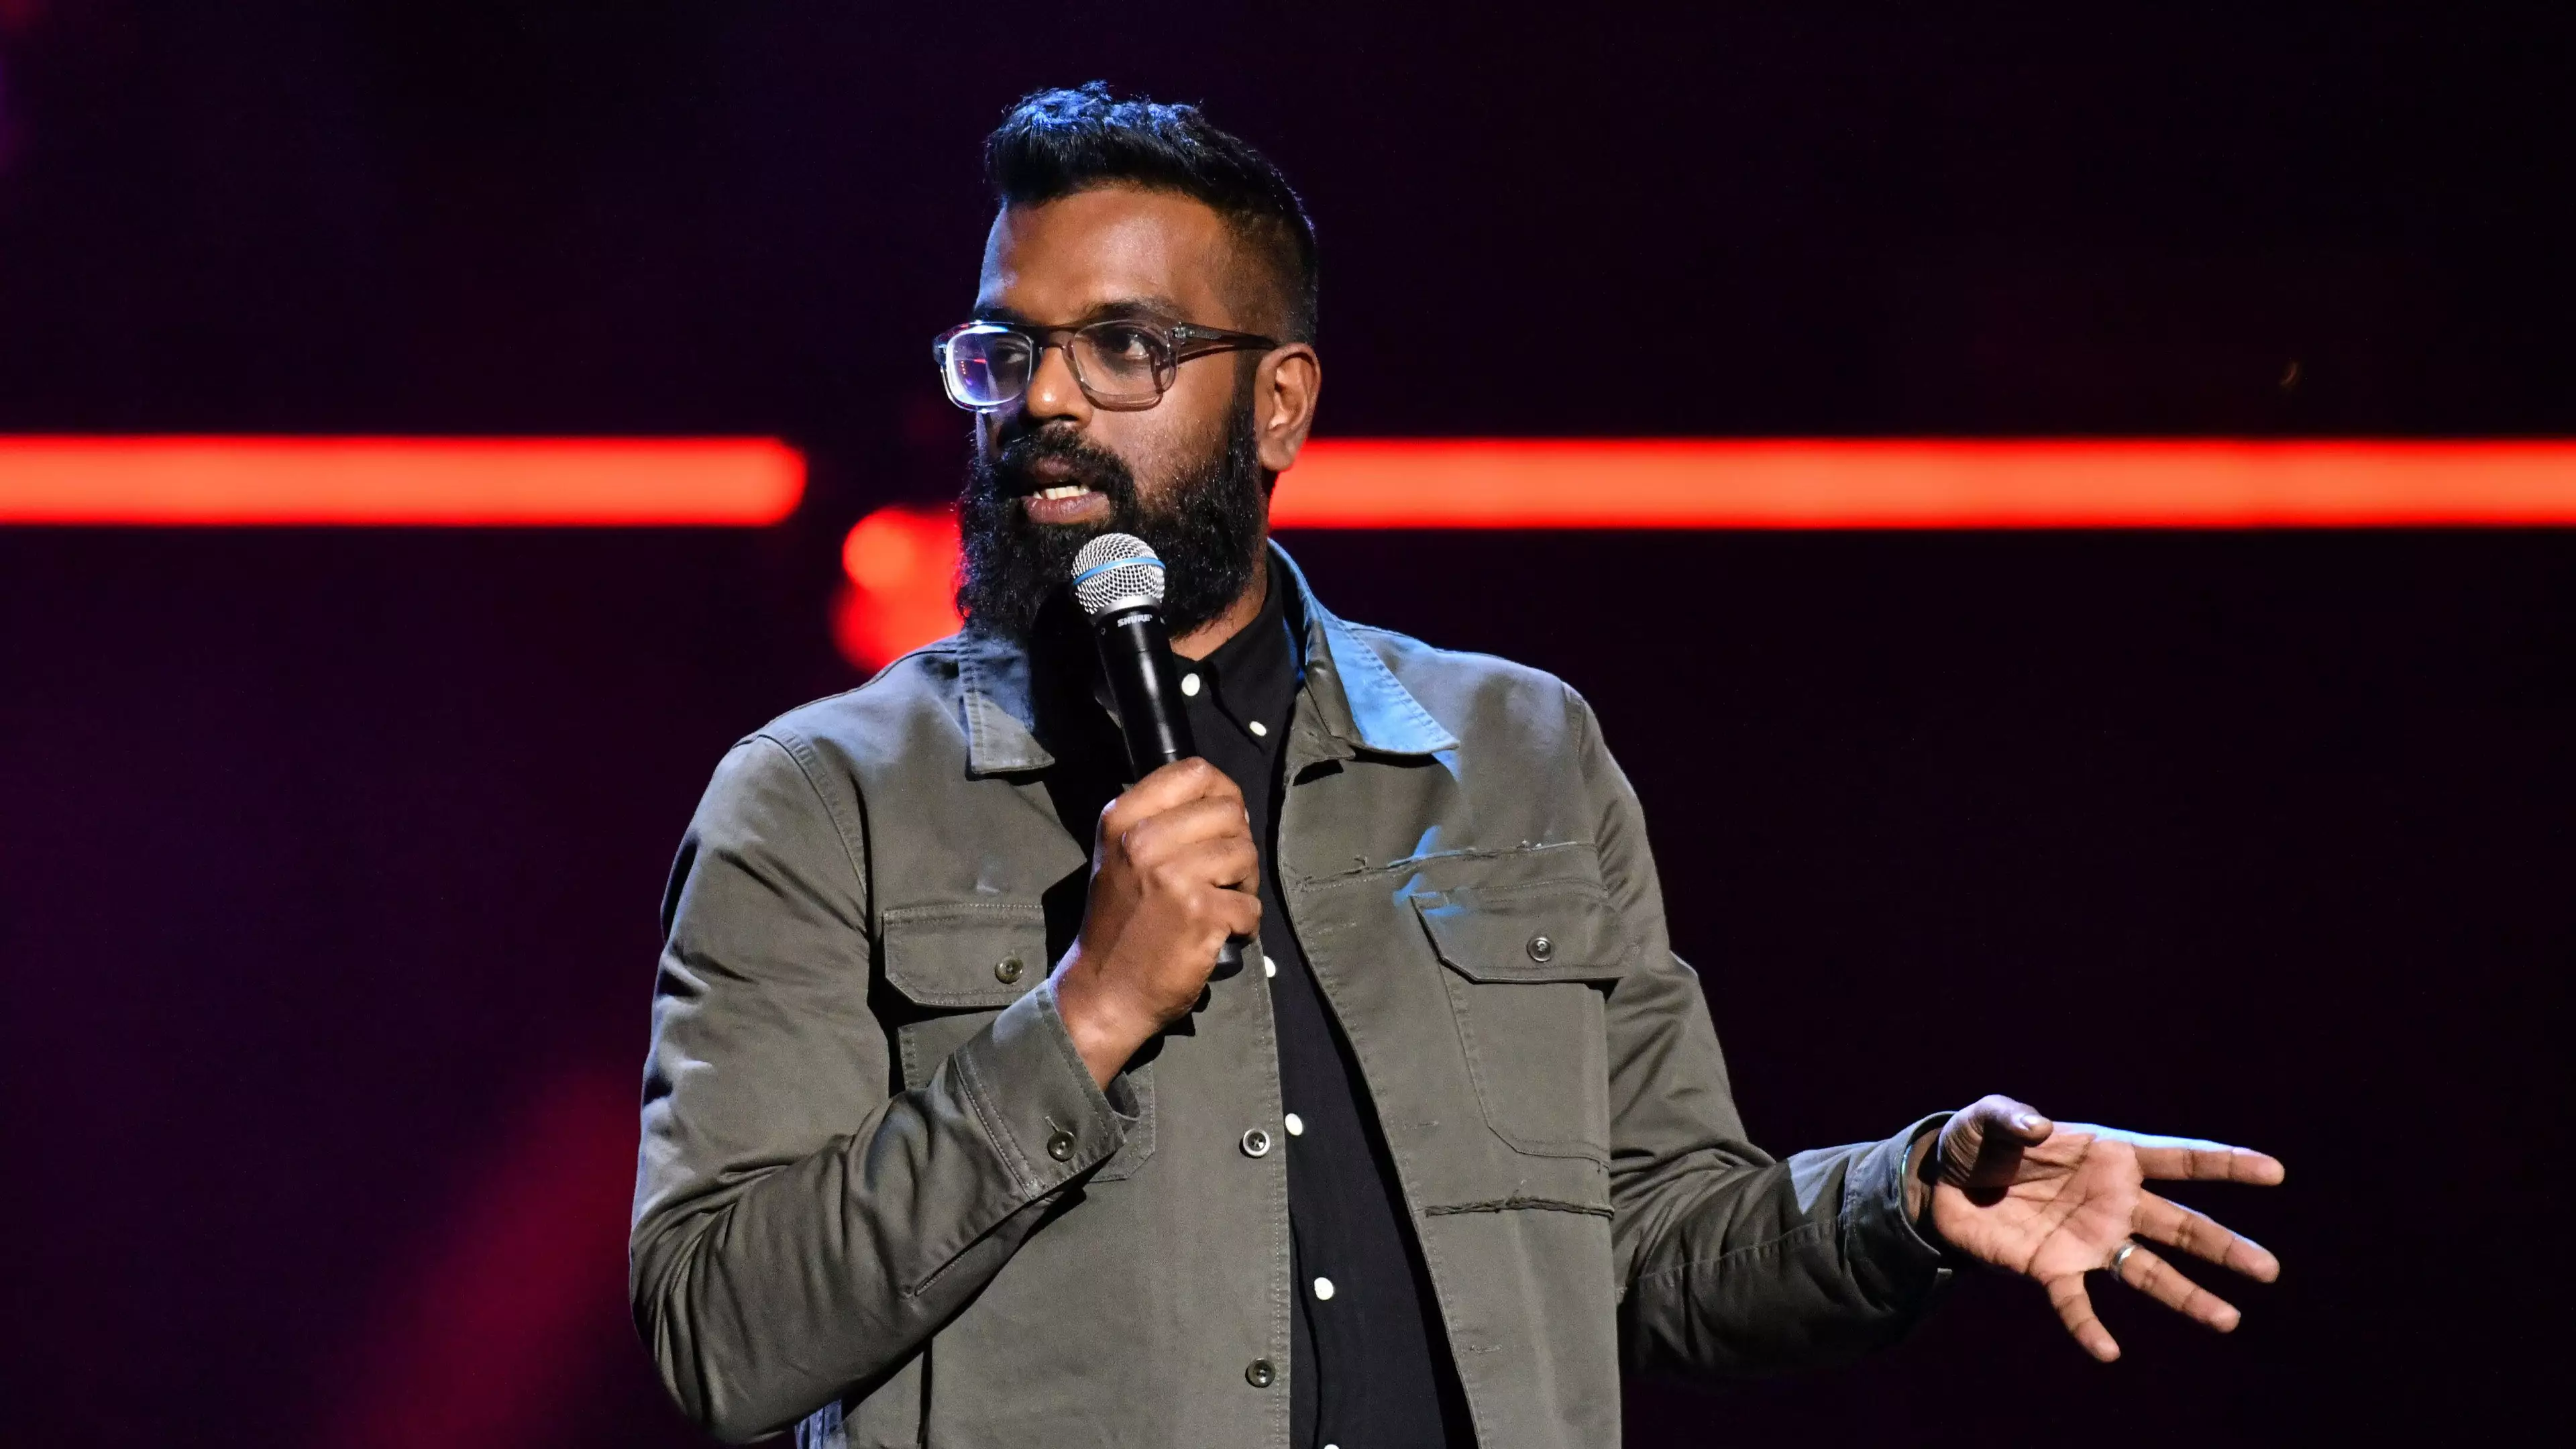 Romesh Ranganathan Heckled With Racist Abuse At His Stand-Up Show